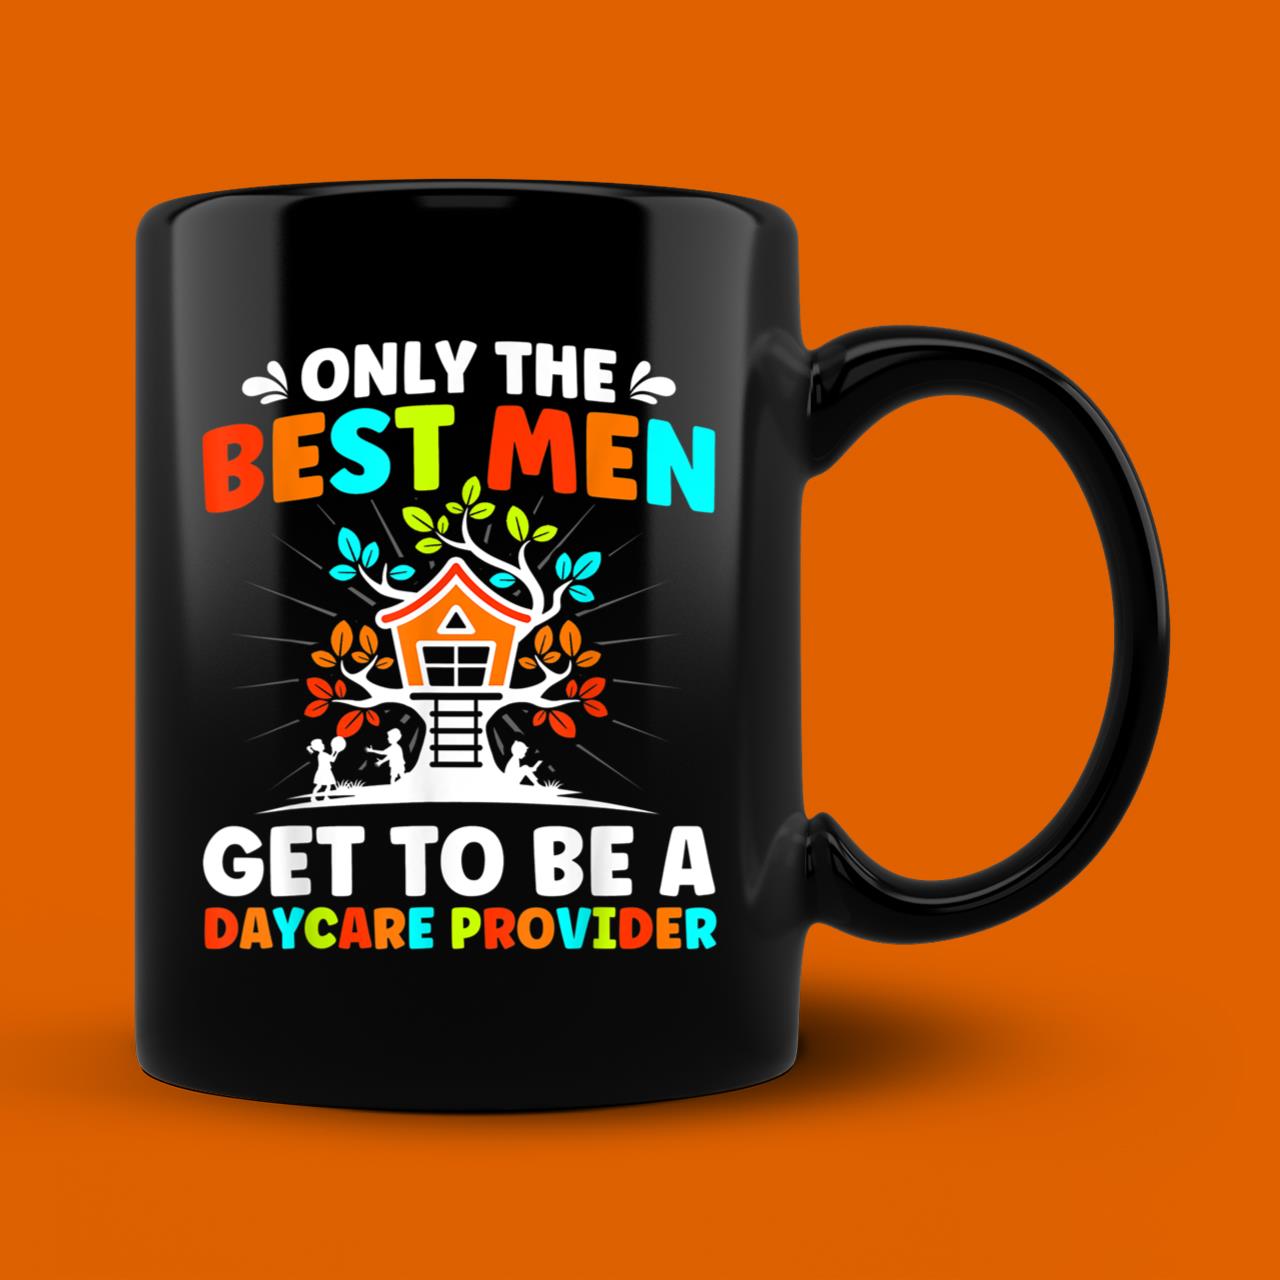 Mens Best Men Get To Be A Daycare Teacher Provider Childcare T-Shirt